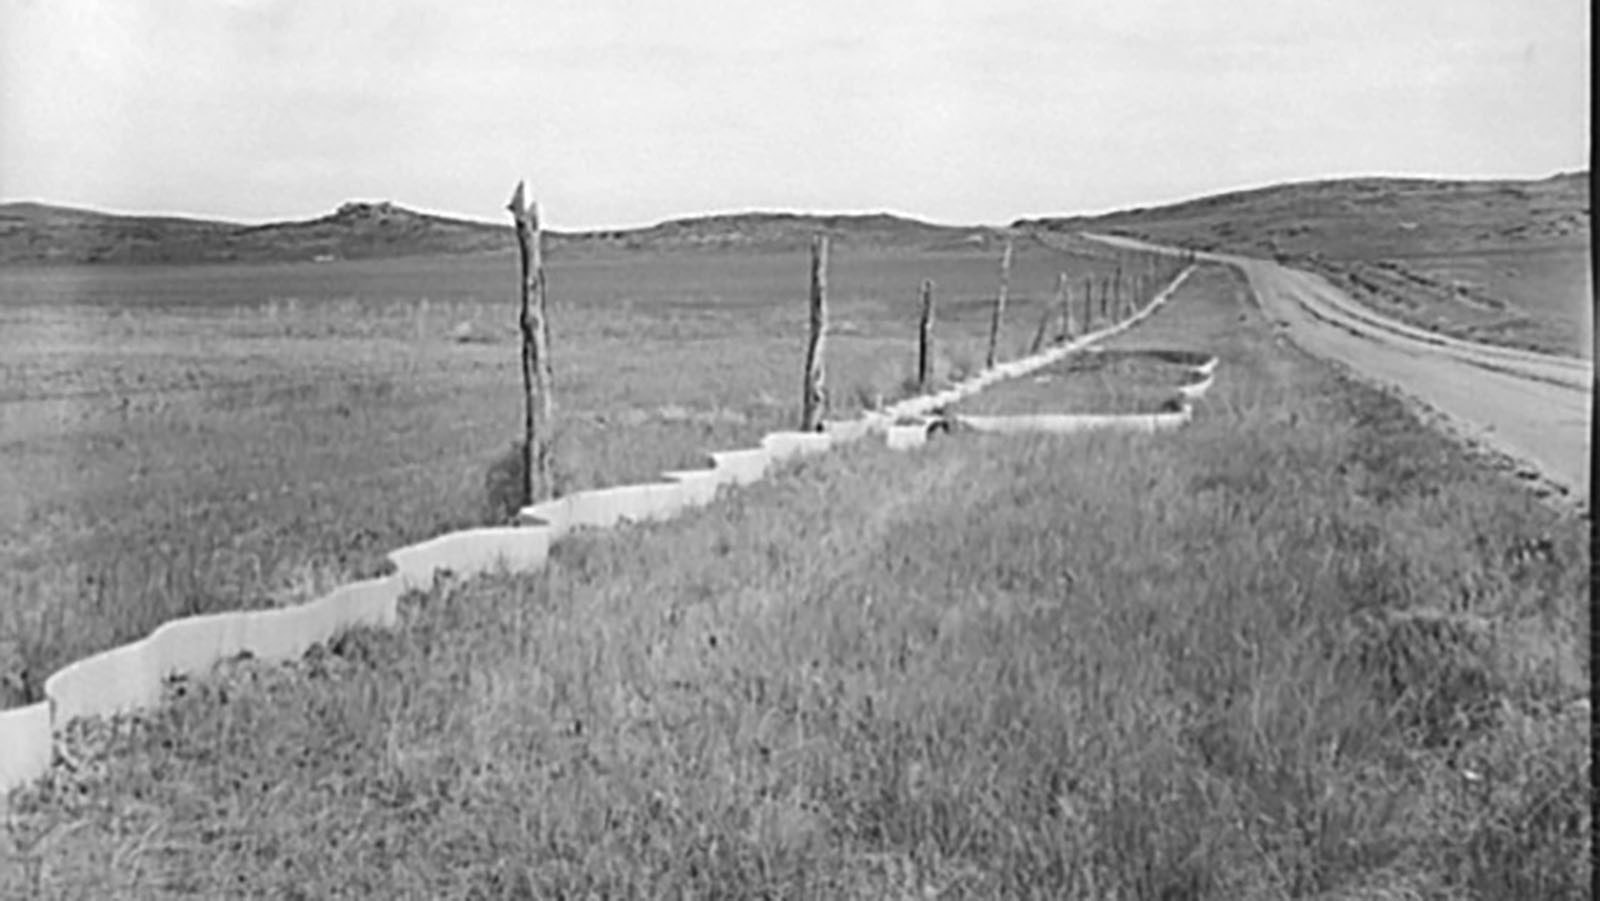 This short tin fence was enough to stop hoards of Mormon crickets swarming in and around Sundance in the 1930s.